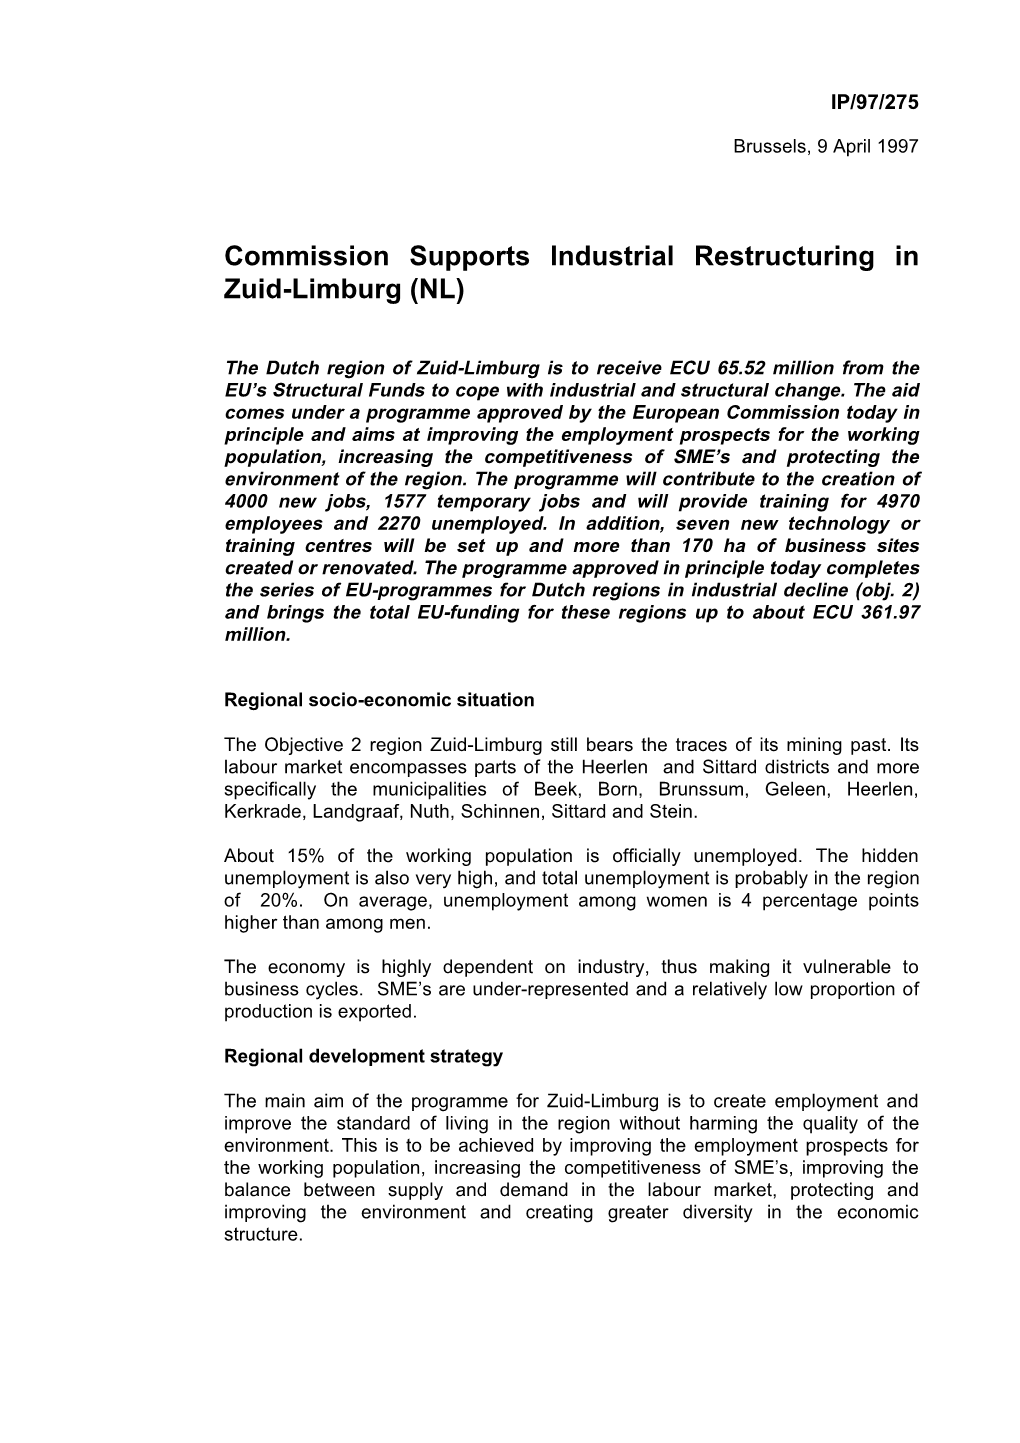 Commission Supports Industrial Restructuring in Zuid-Limburg (NL)